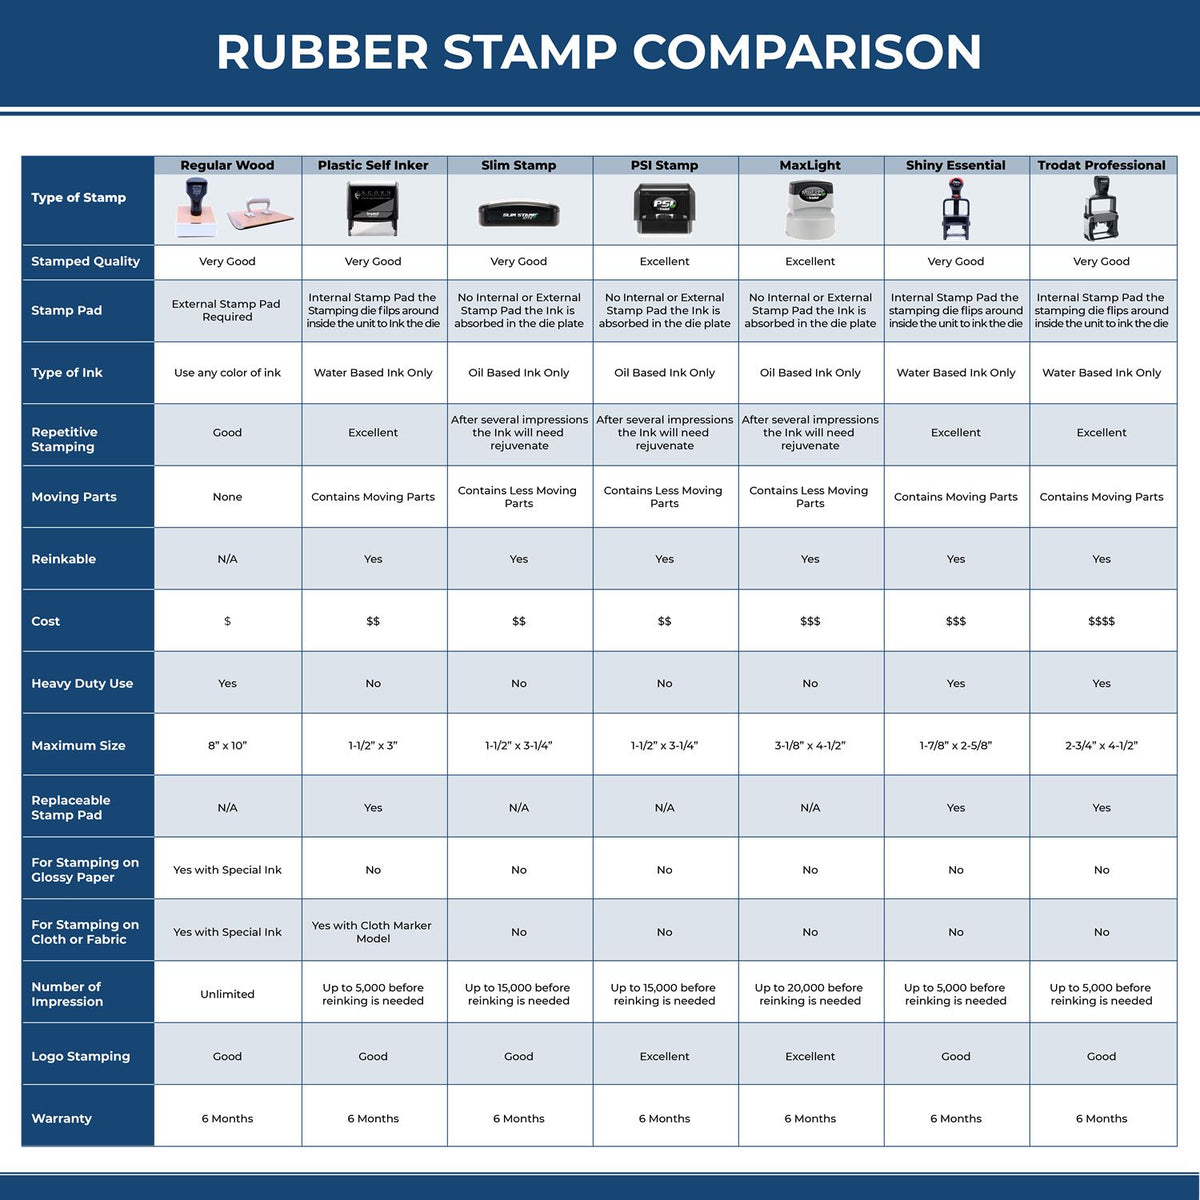 A comparison chart for the different types of mount models available for the Self-Inking Florida PE Stamp.